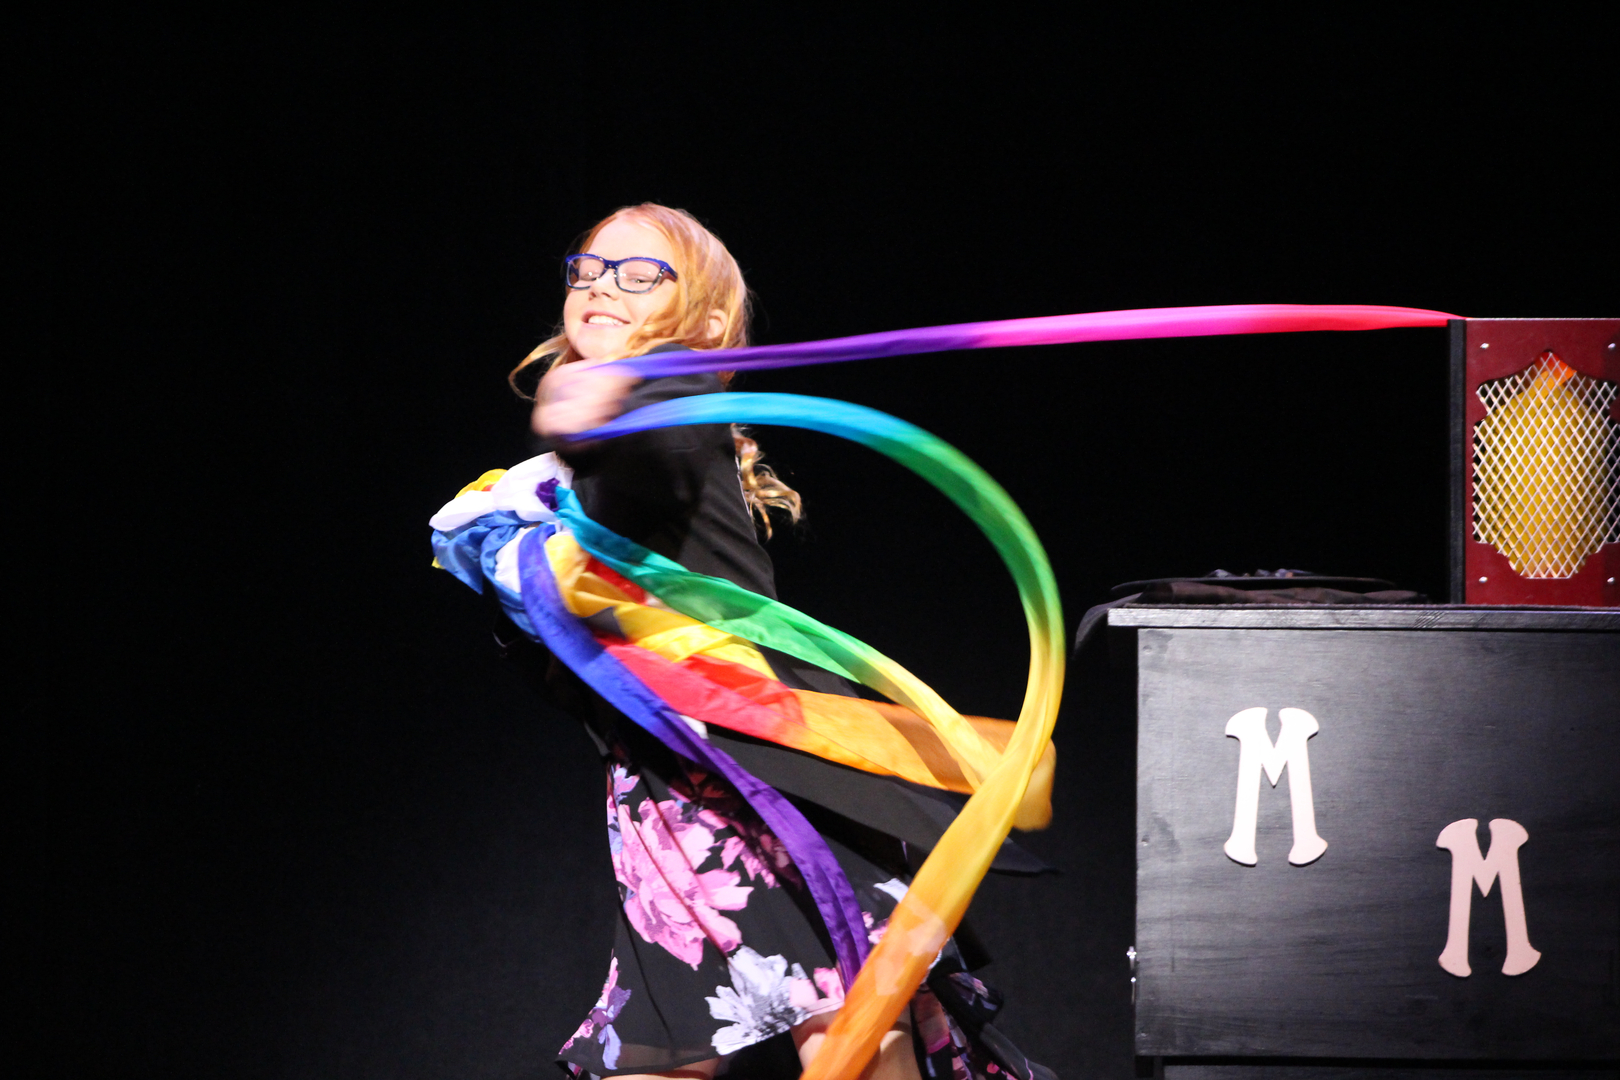 A woman holding a colorful ribbon on stage.